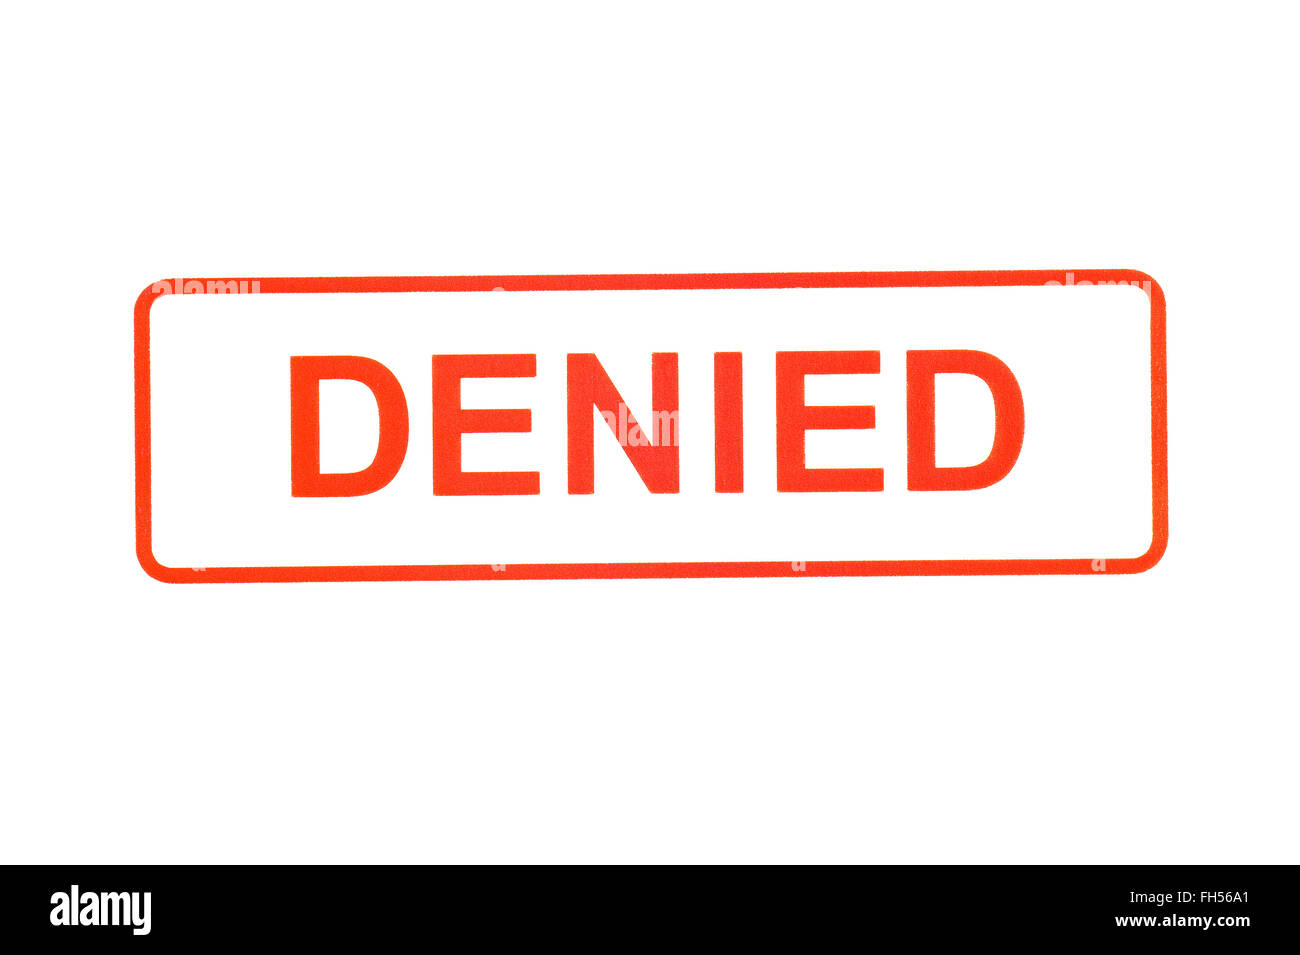 Denied Rubber Stamp Stock Photo